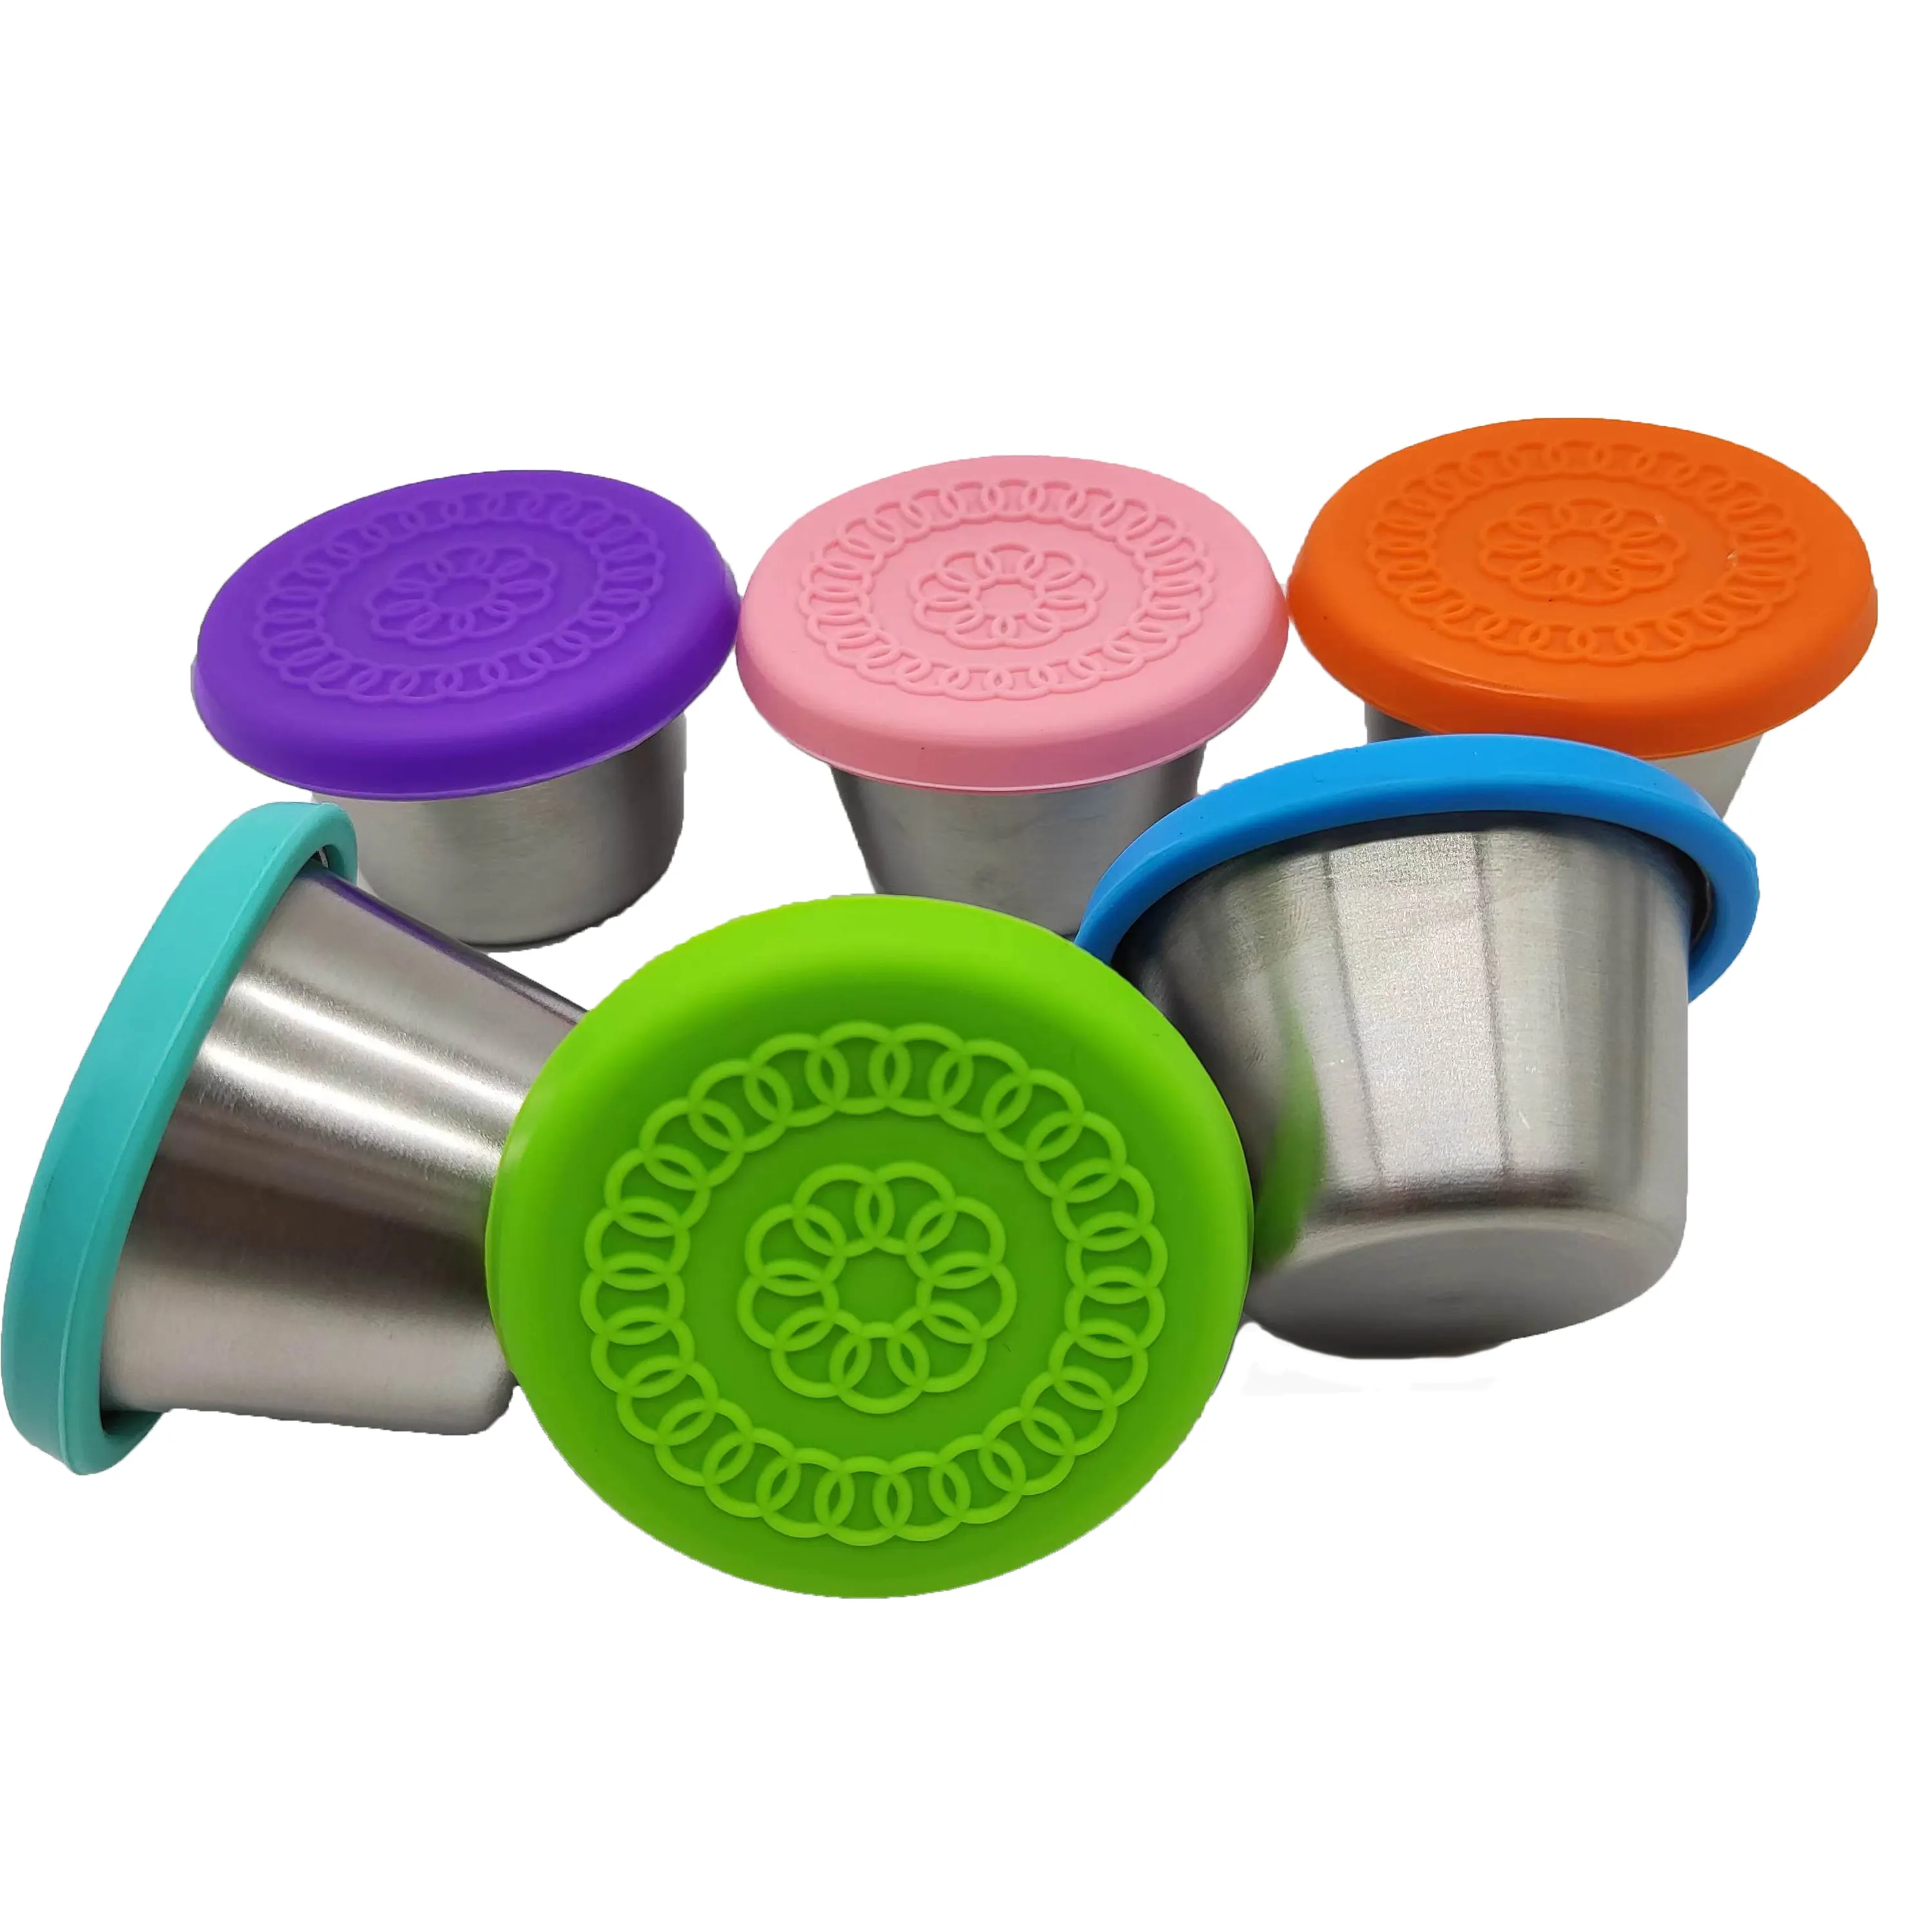 70ML Silicone Dipping Cup Salad Dressing Containers Stainless Steel Condiment Cup With Silicone Lids Storage Small Food Storage